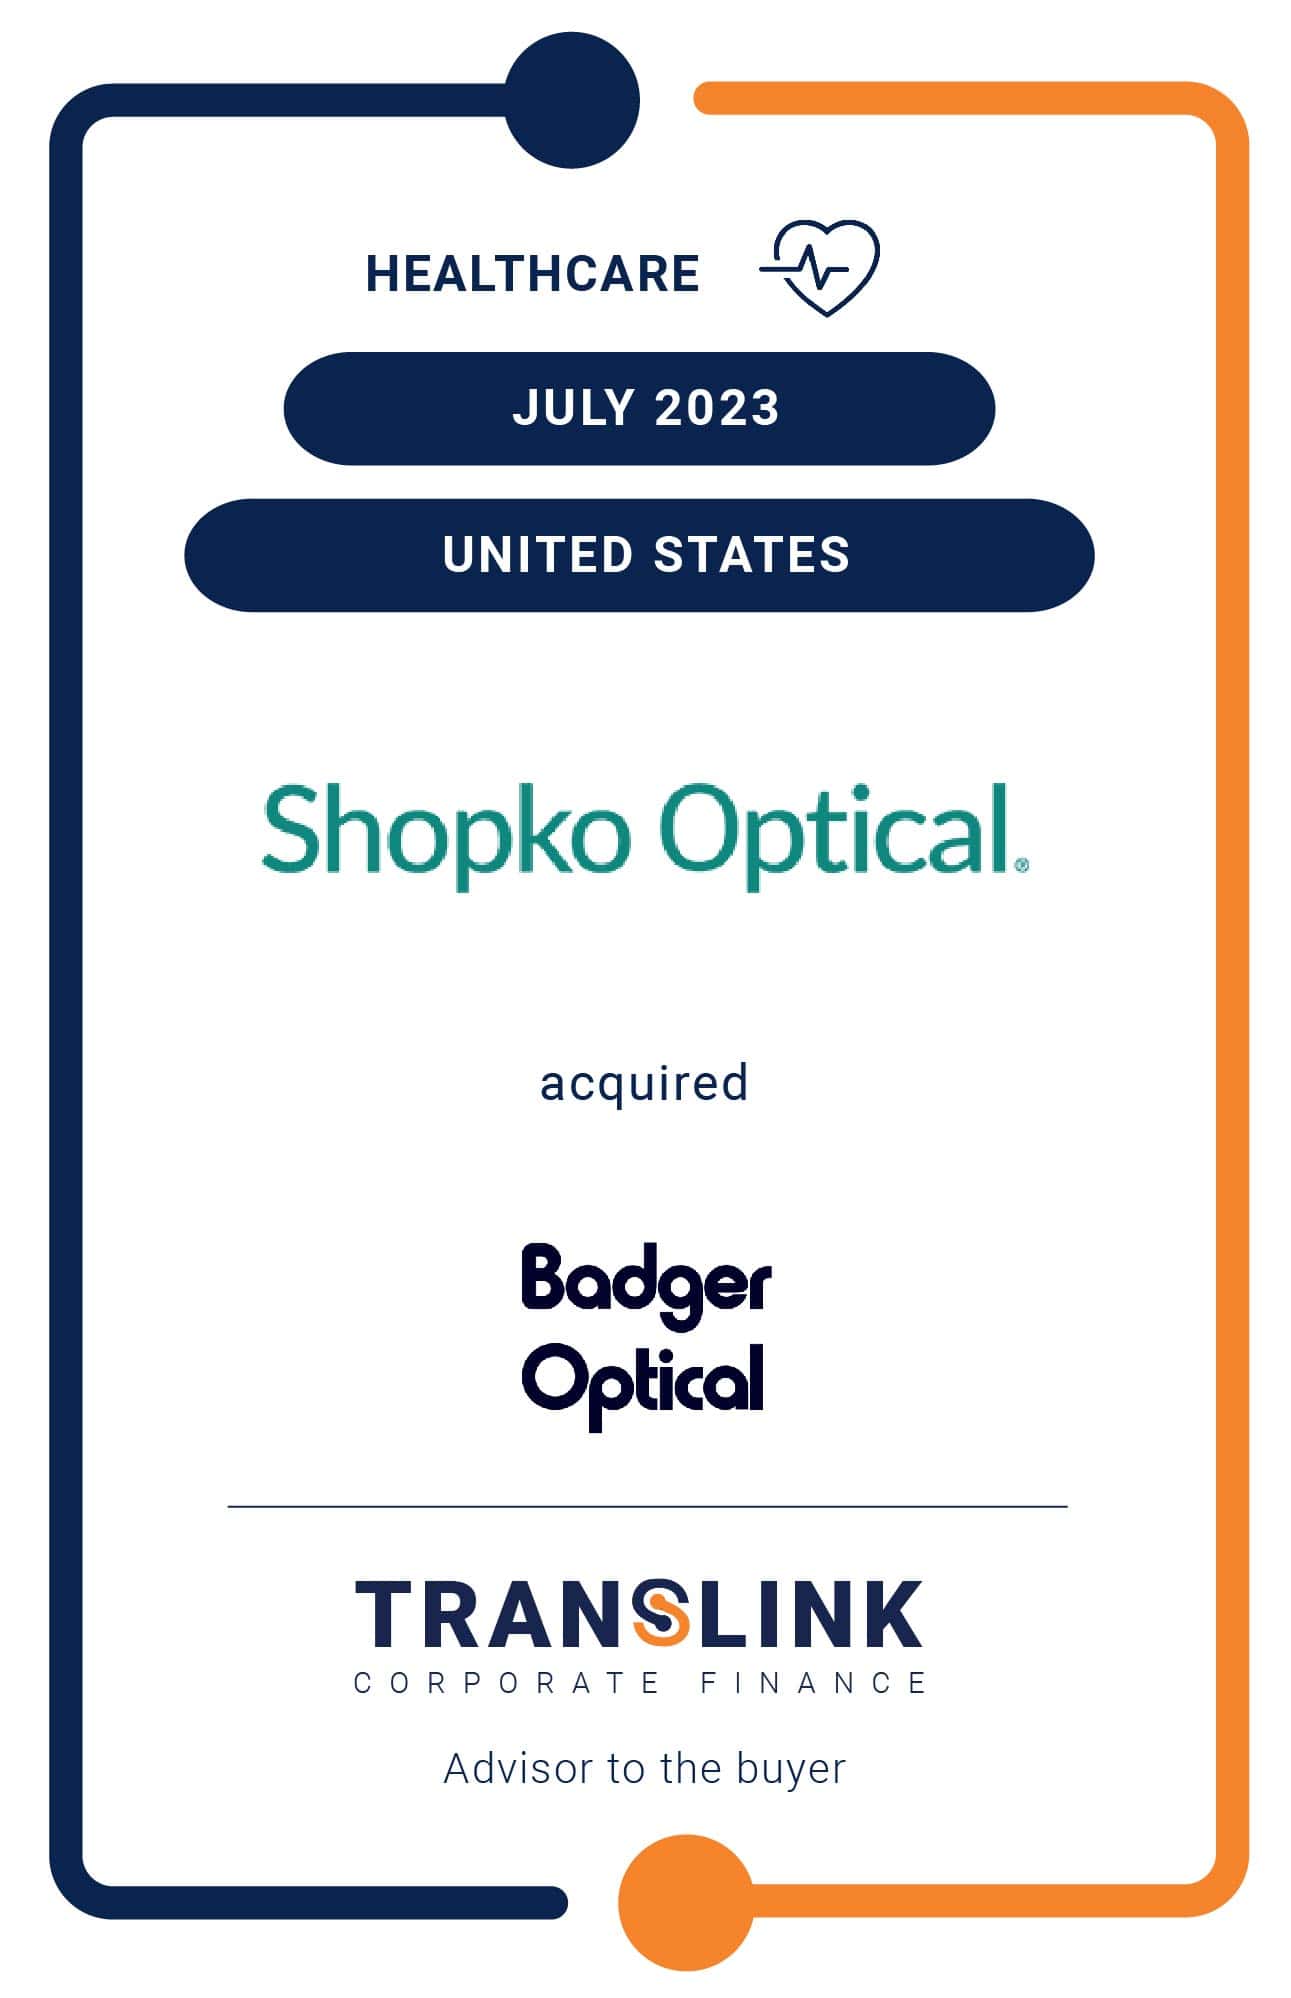 Translink Corporate Finance Acted As The Advisor To Shopko Optical In Its Acquisition Of Badger Optical